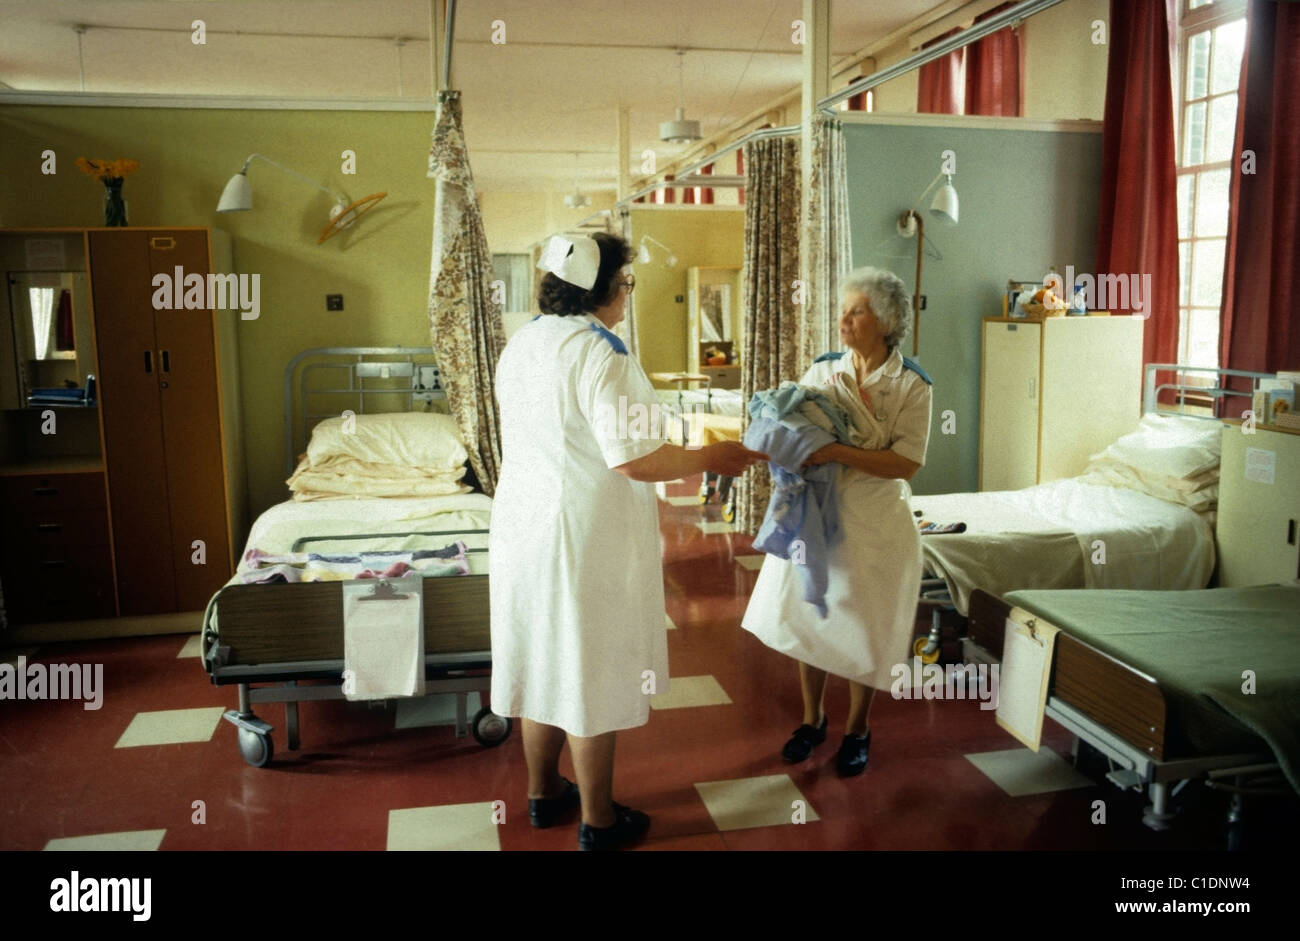 NHS nurse ward matron vintage nurses in a white uniforms in conversation changing linen on beds in  a geriatric ward  in a Bronglais hospital  in Aberystwyth Wales UK 1980s 1983   KATHY DEWITT Stock Photo